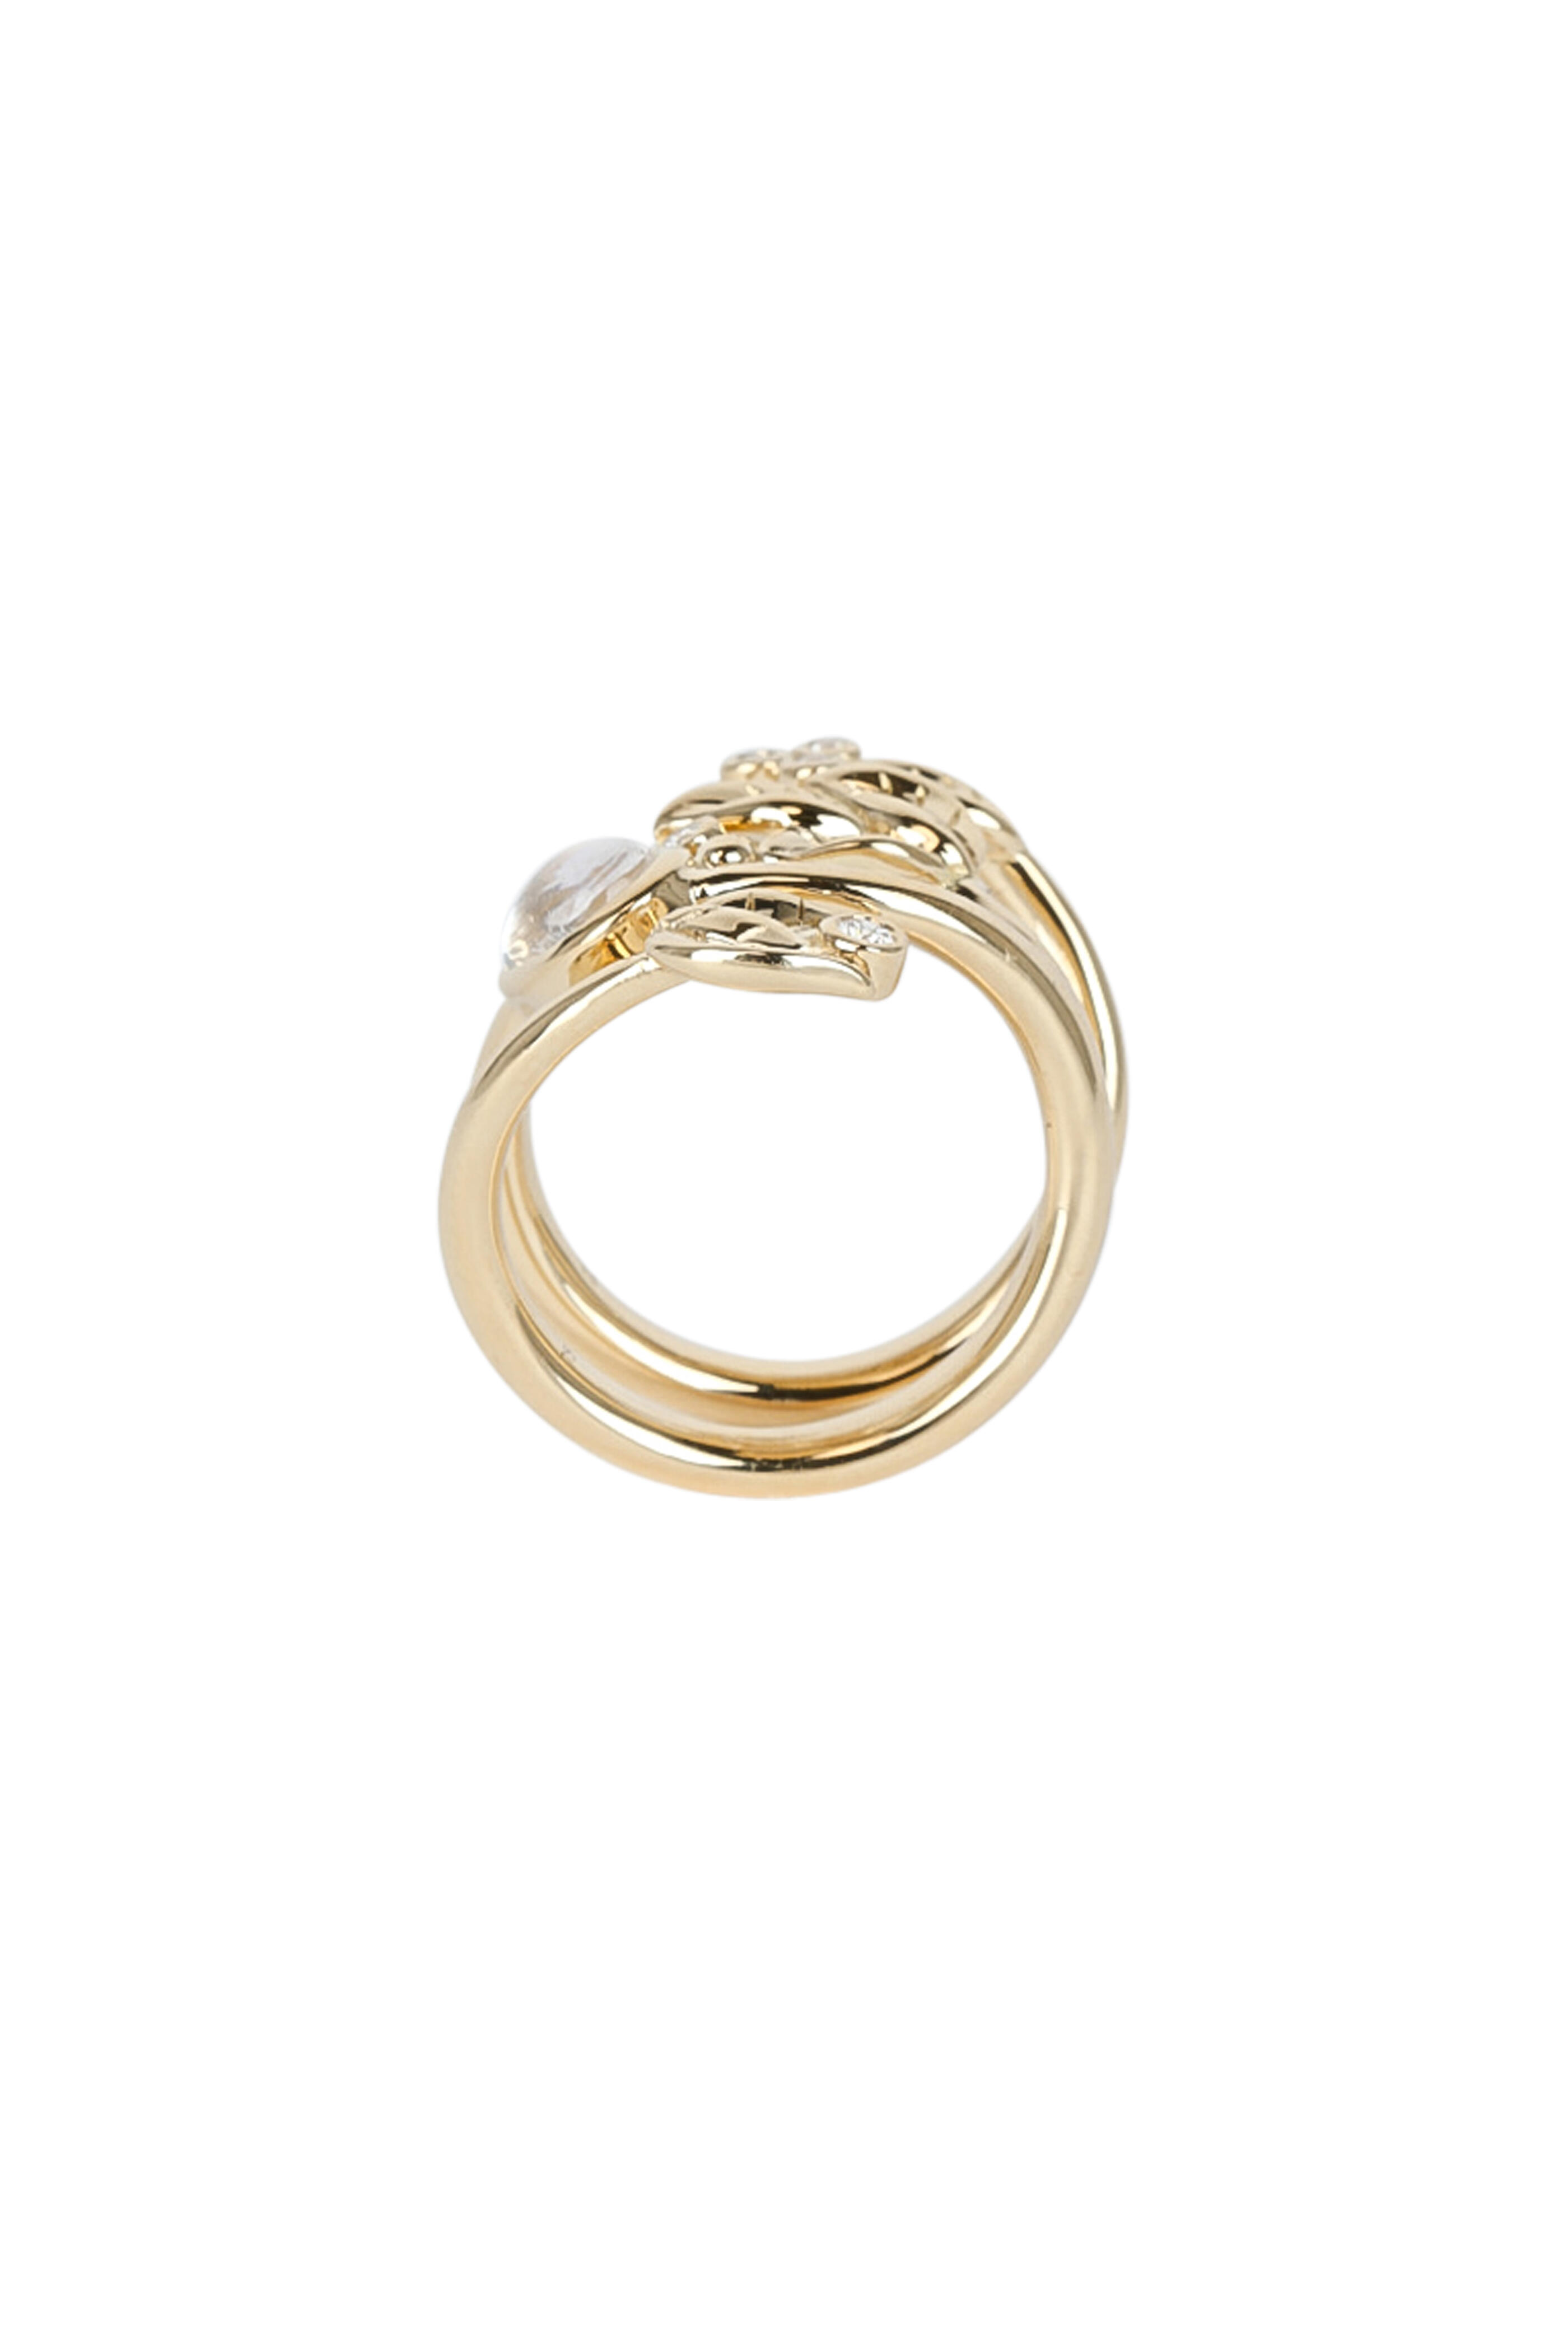 Temple St. Clair - 18K Yellow Gold Moonstone Vine Ring